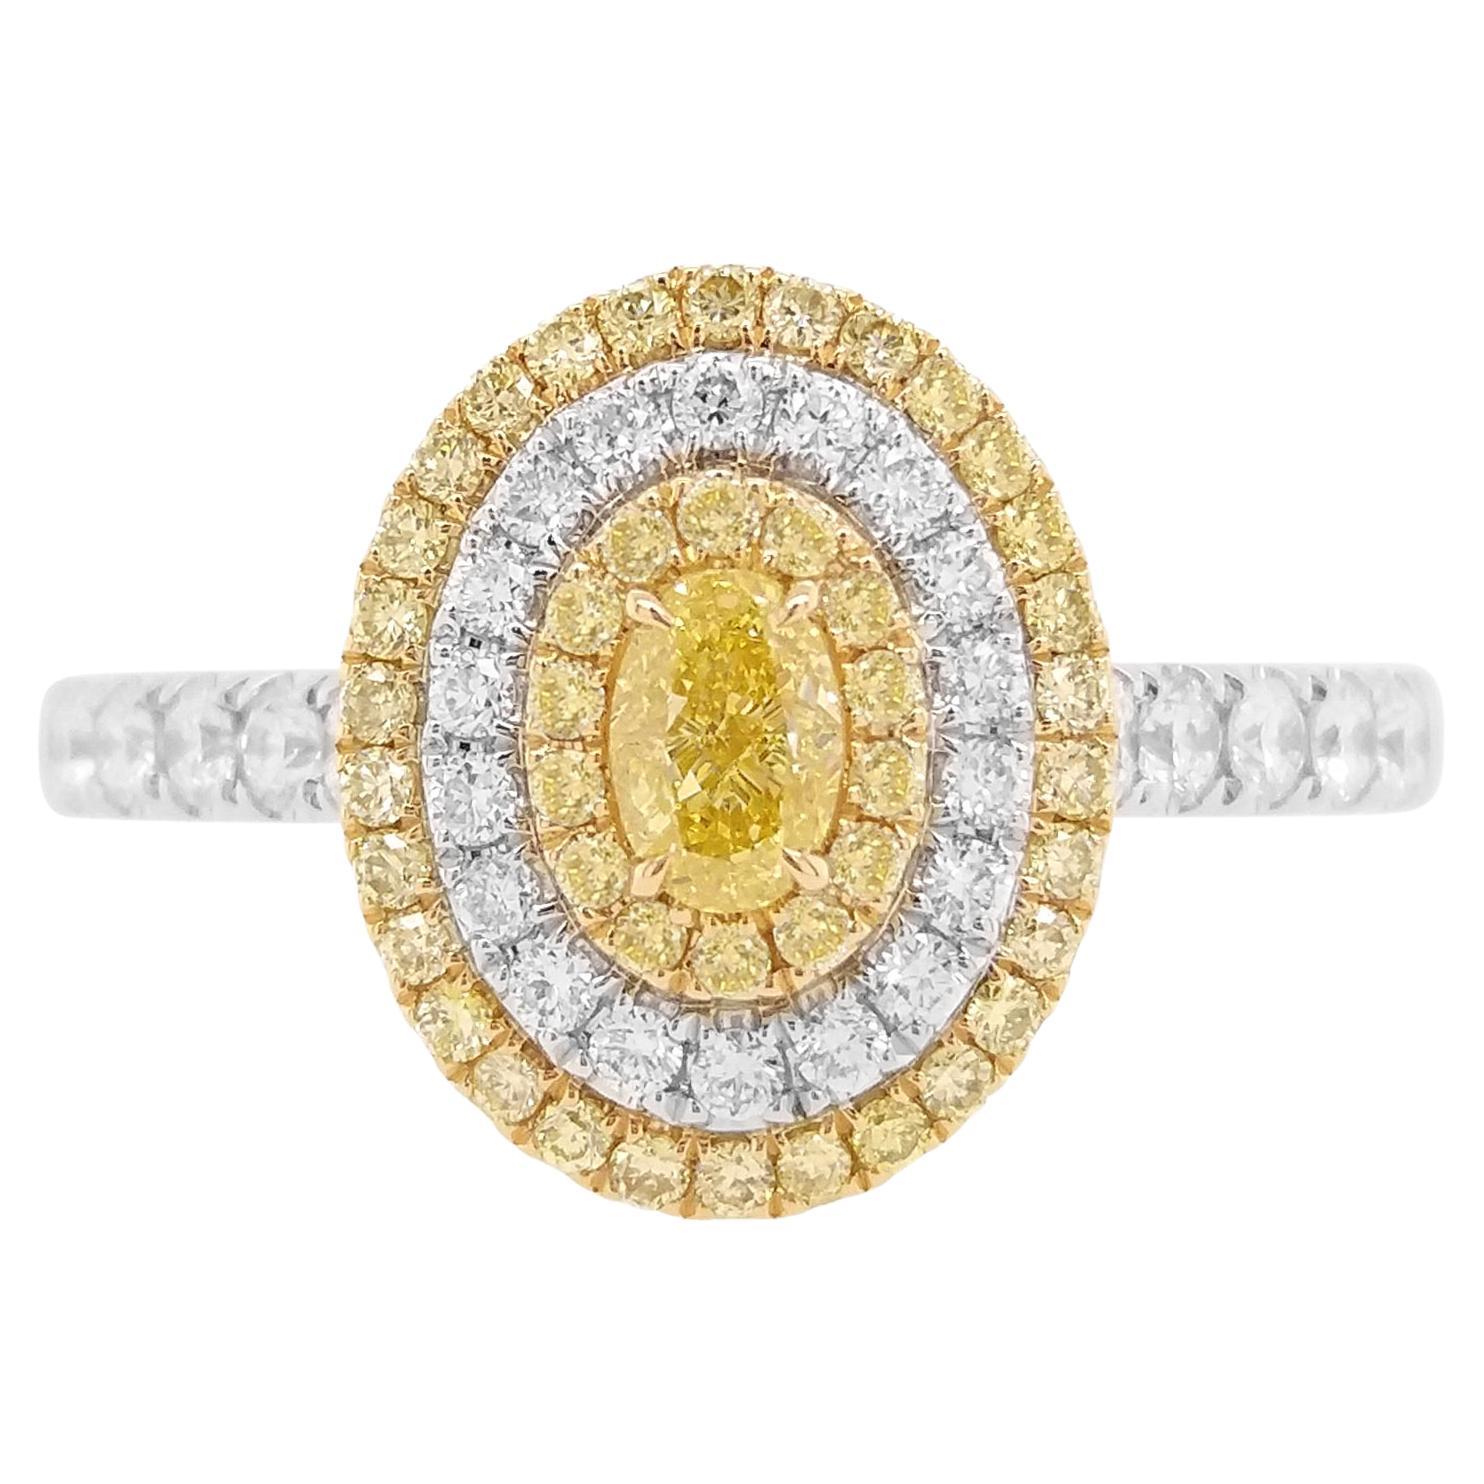 Certified Yellow and White Diamond K18 Gold Ring